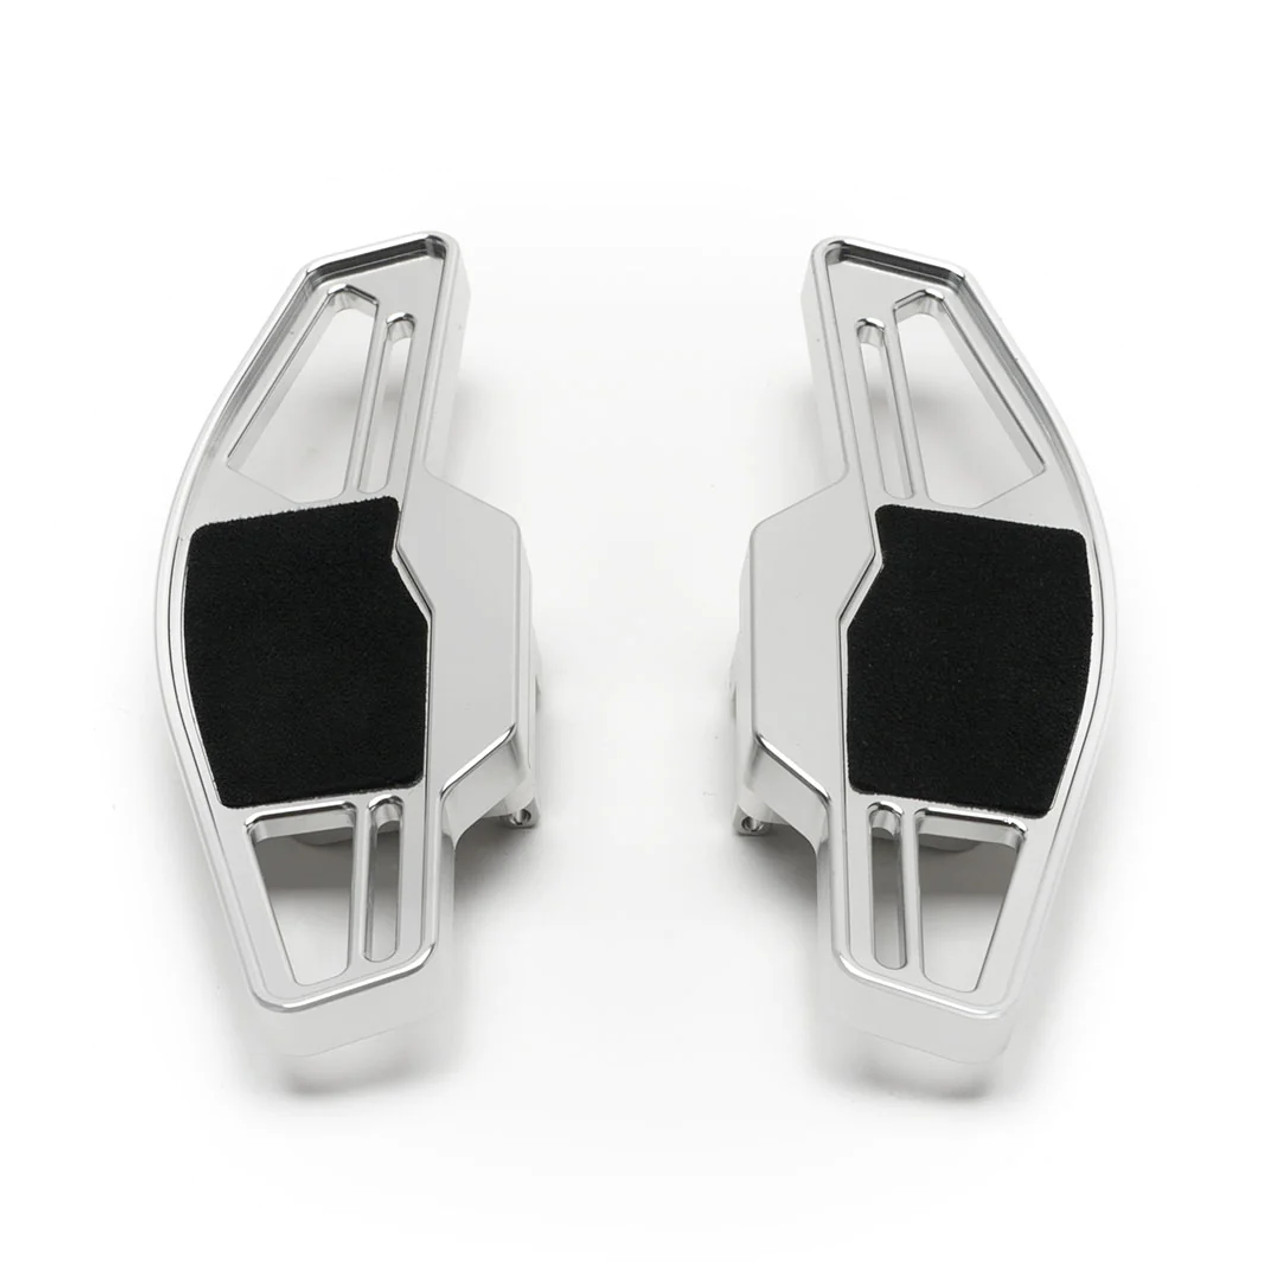 BFI Complete Replacement Shift Paddles for Audi 8W